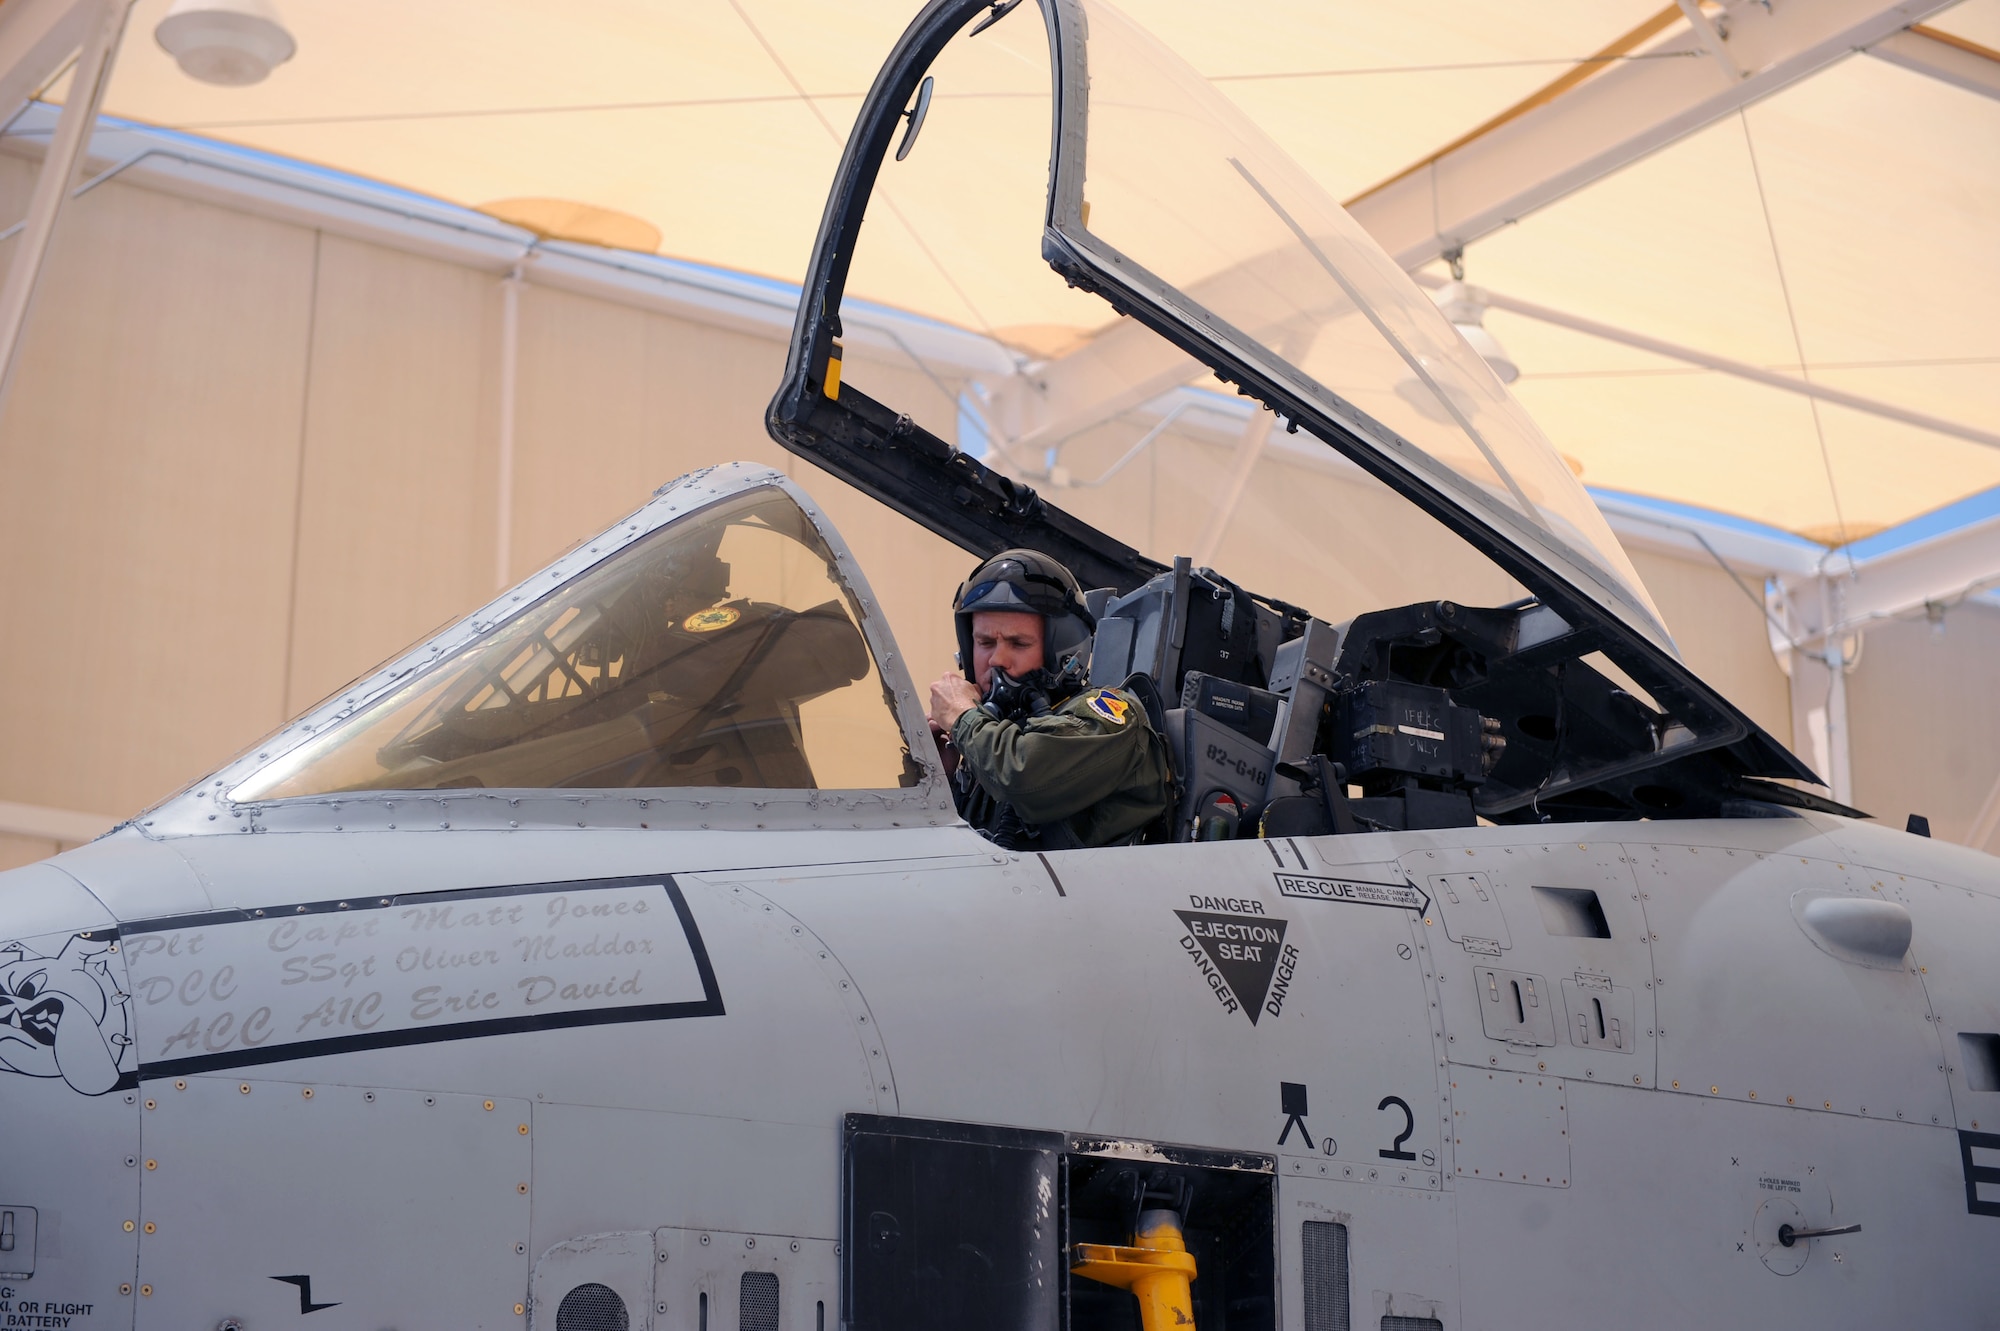 Maj. Dennis Hargis, 354th Fighter Squadron fighter pilot, adjusts the fit of his helmet as he sits in his aircraft at Davis-Monthan Air Force Base, Ariz., July 17, 2013.  The 354th FS recently resumed flying operations after a three-month, sequestration caused stand-down. (U.S. Air Force photo by Airman 1st Class Saphfire Cook/Released)